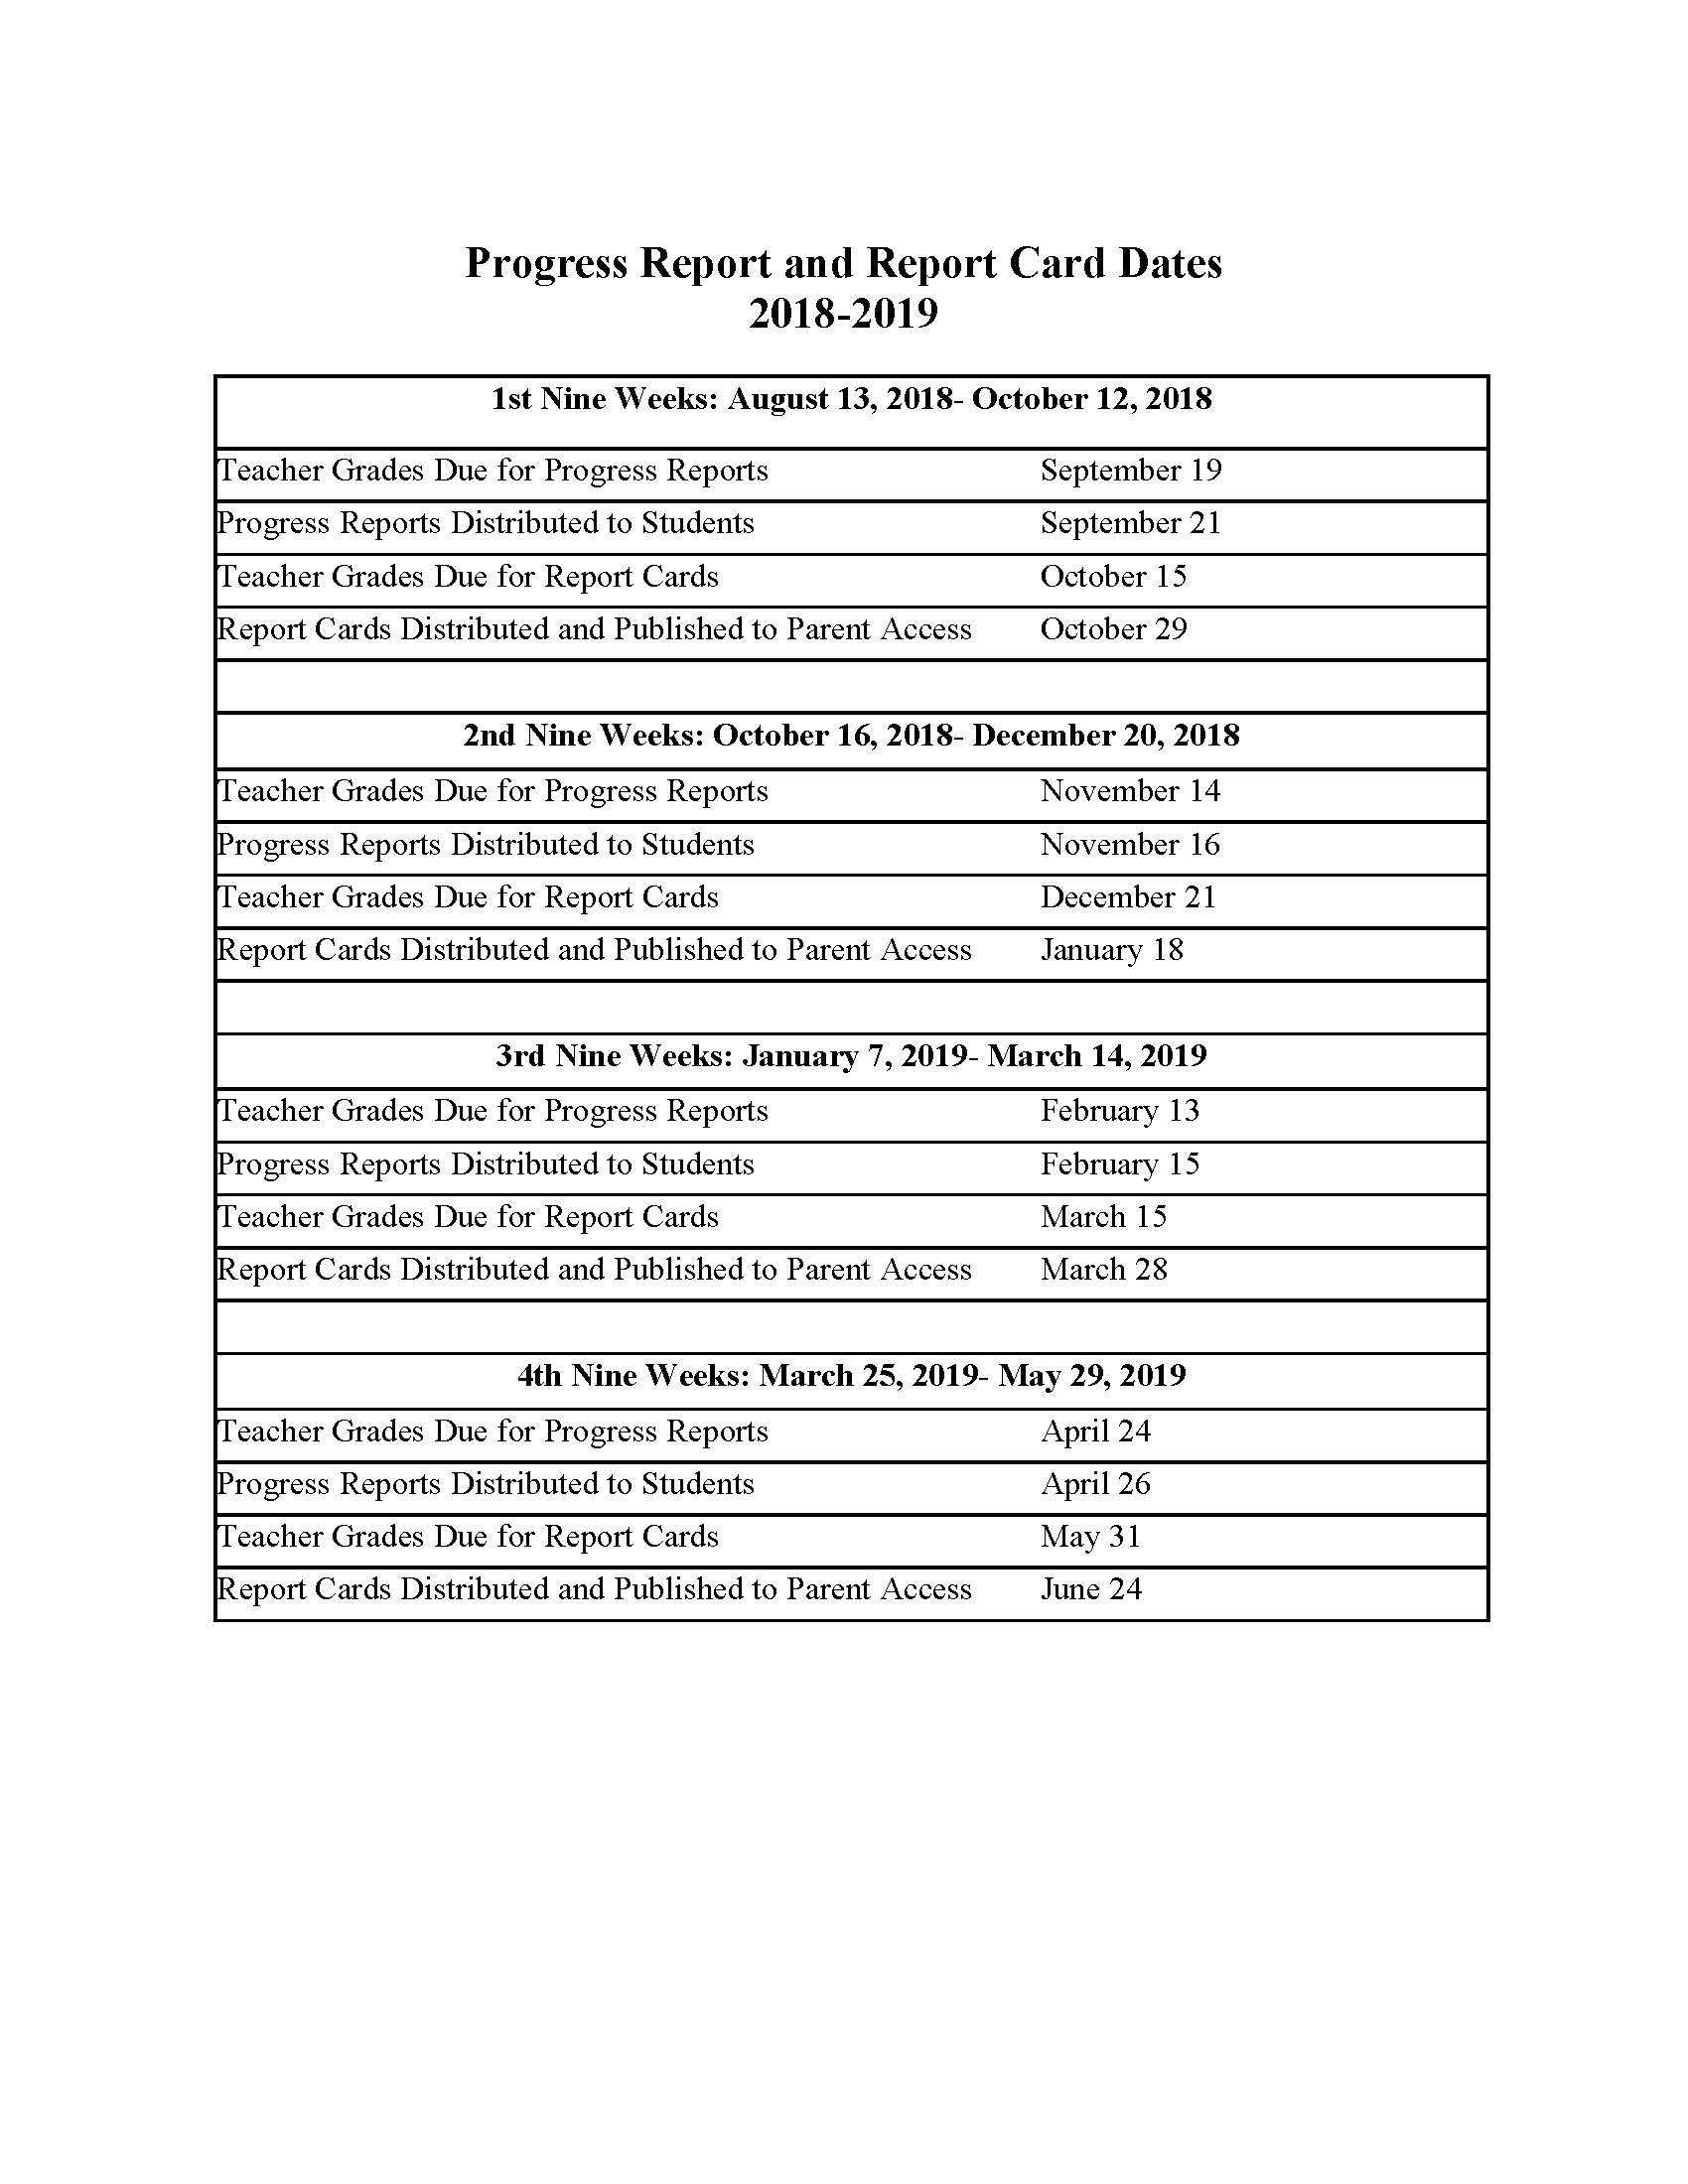 Progress Report & Report Card Dates - Apopka Hs Throughout Character Report Card Template